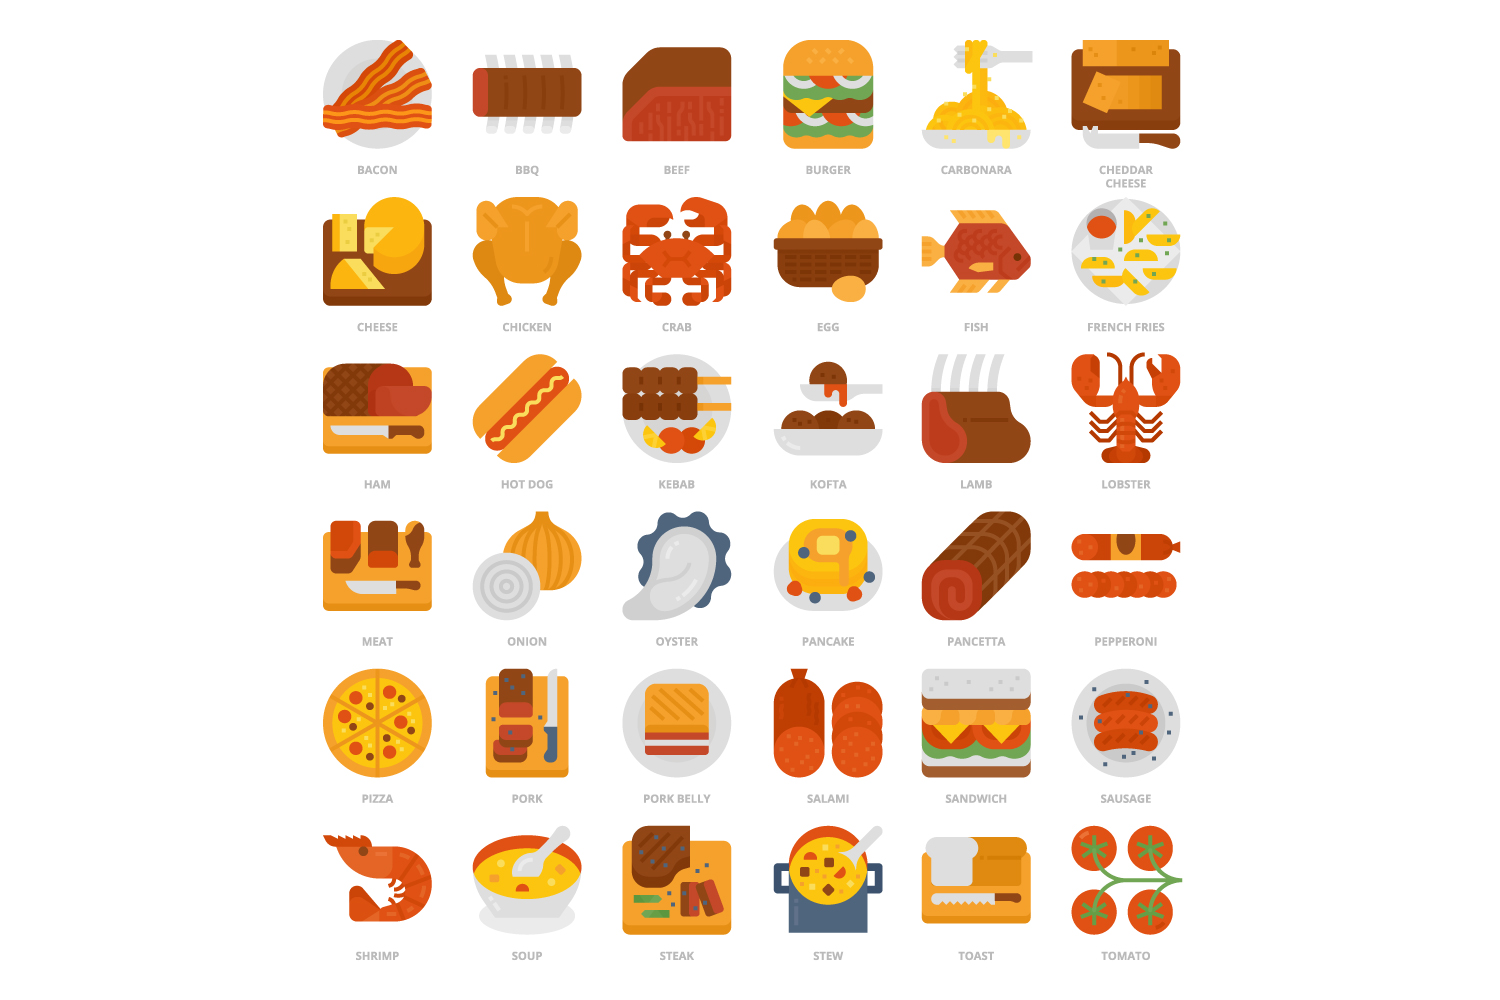 Poster with different types of food on it.